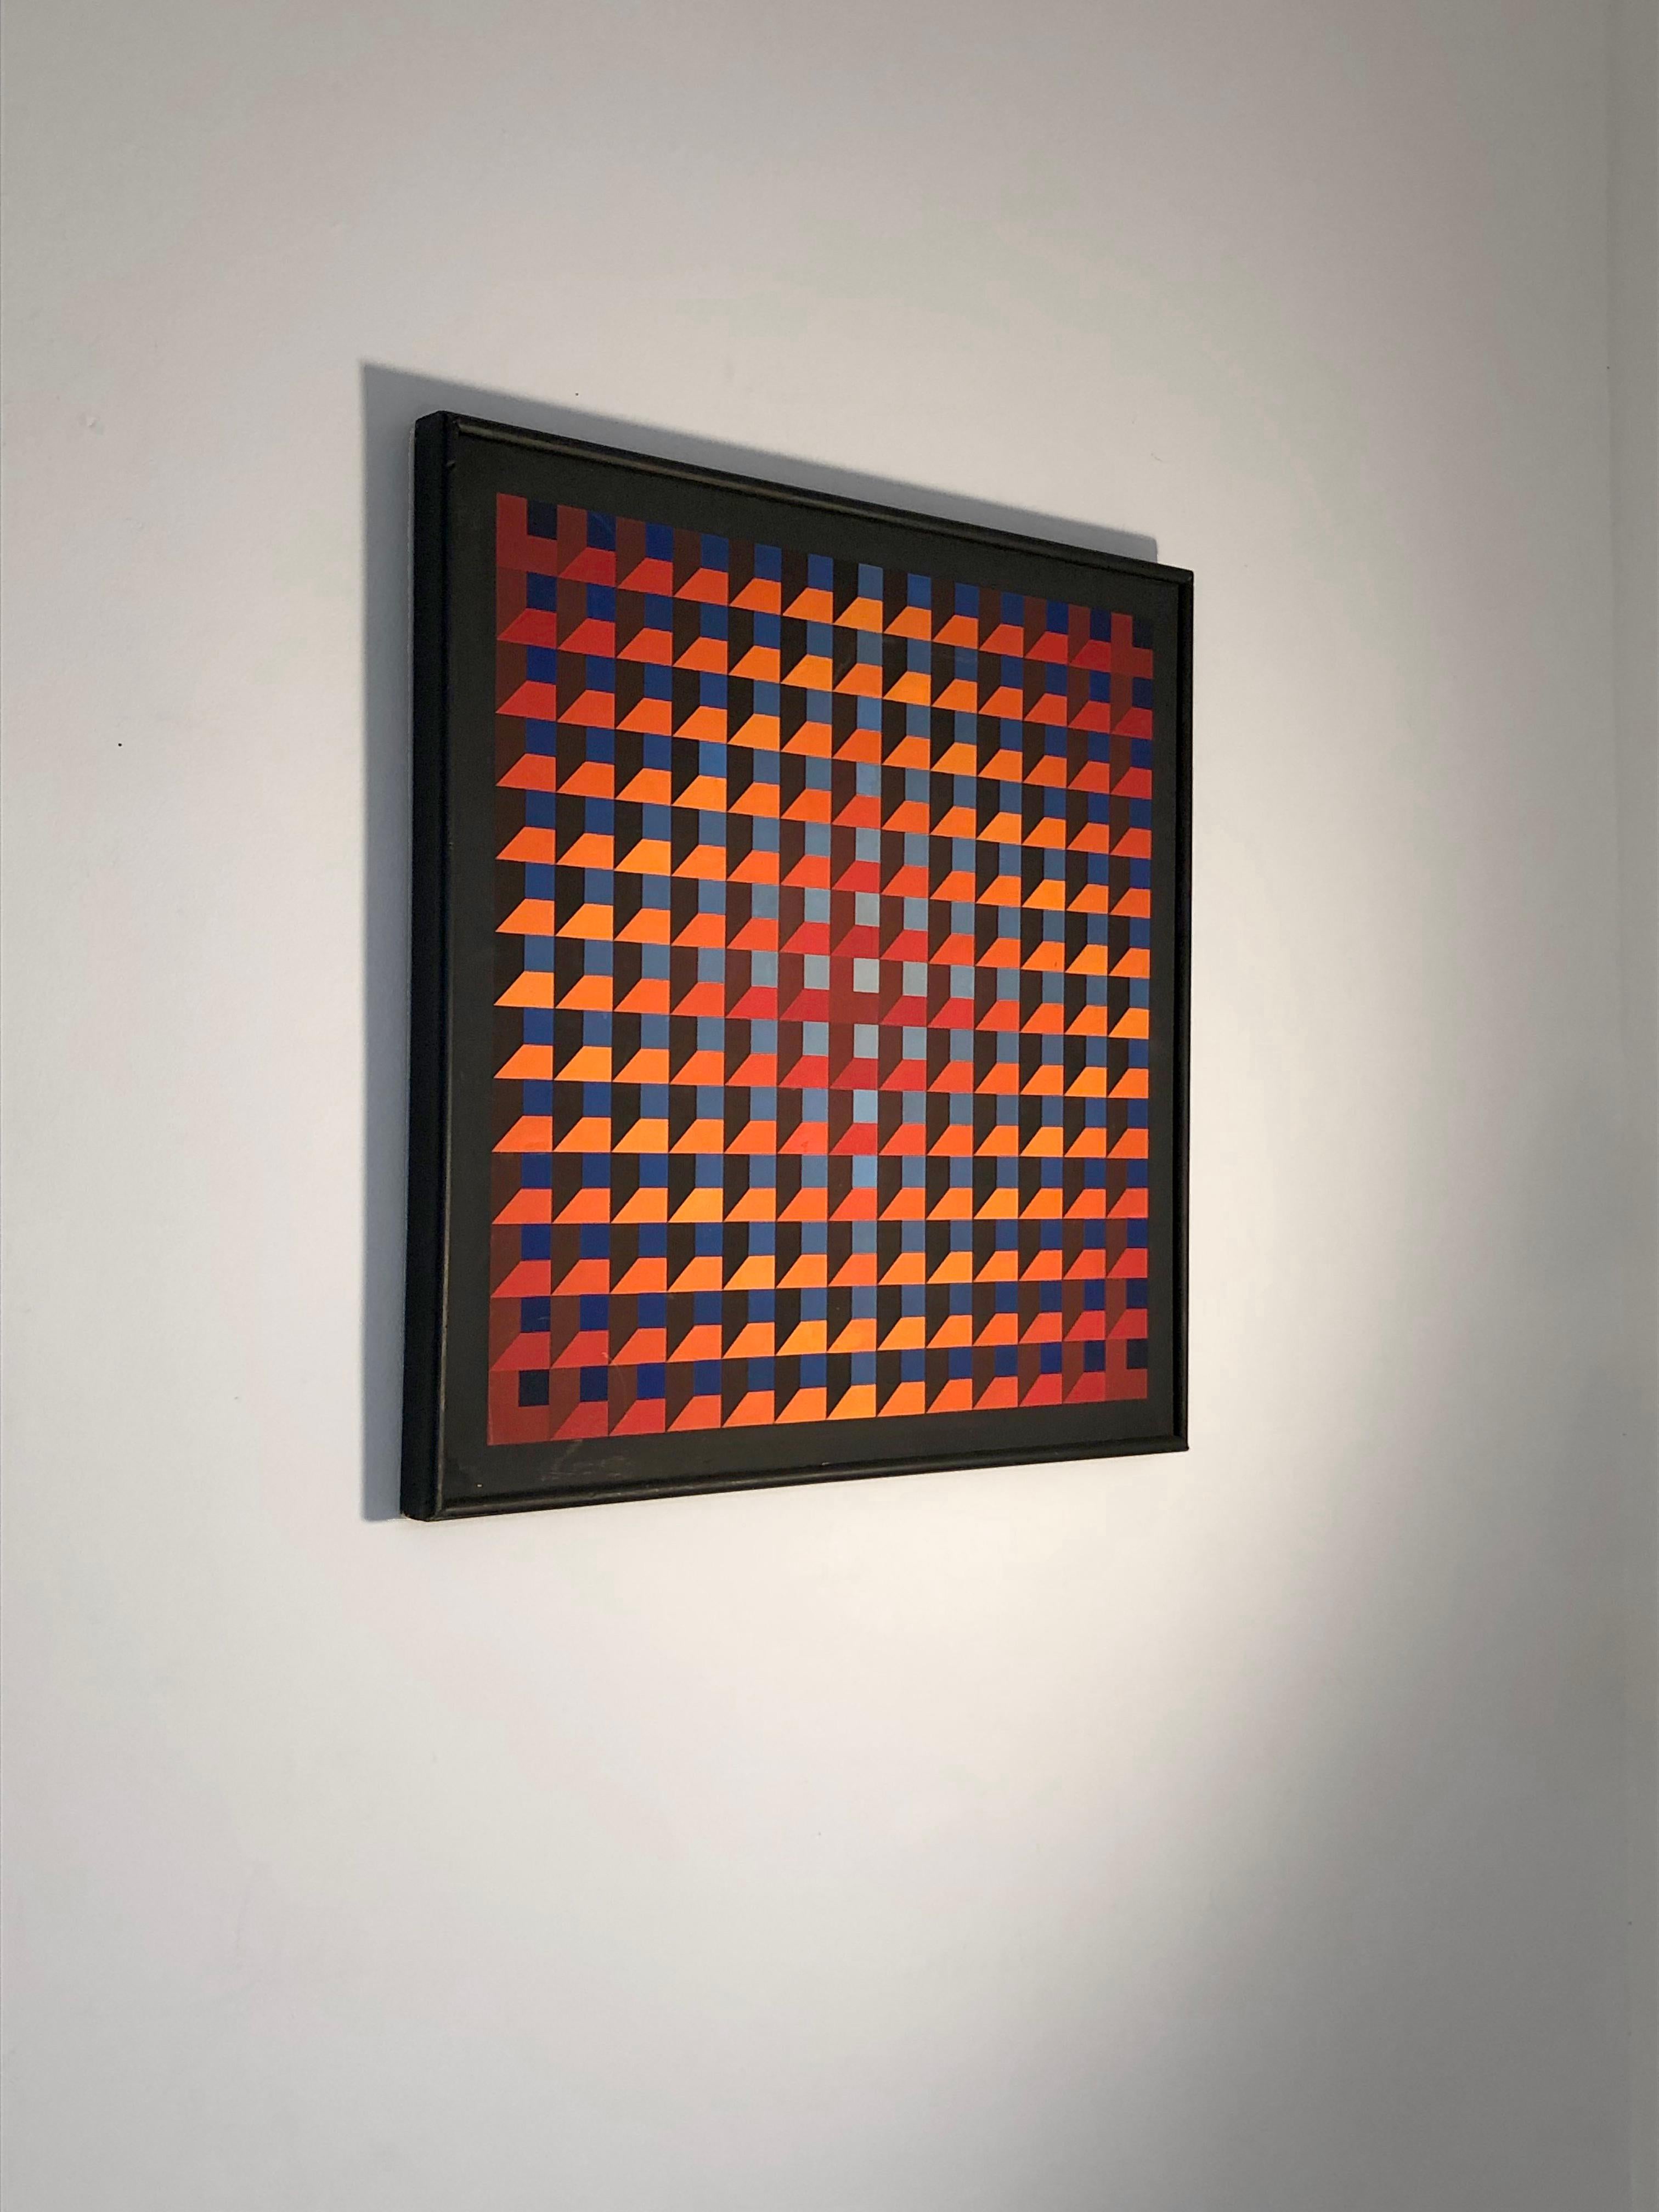 Kinetic An OP-ART KINETIC PAINTING on Panel by JEAN-PIERRE YVARAL VASARELY, France 1968 For Sale